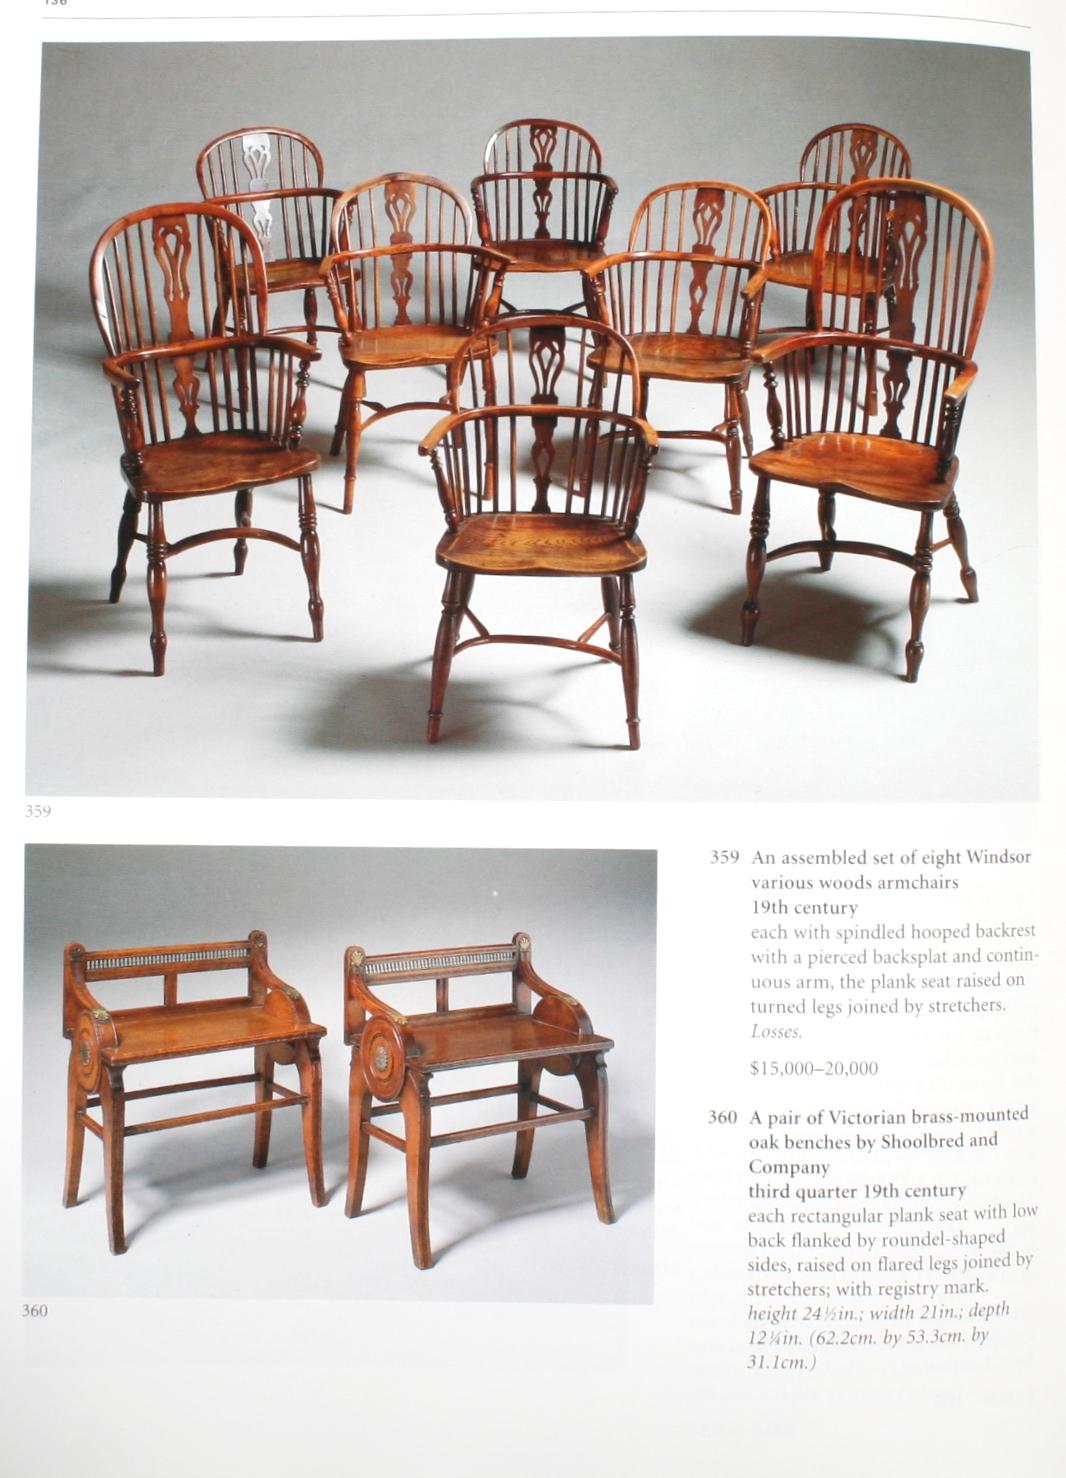 American Sotheby's: English Furniture & Decorations, John L. Boonshaft Collection, 1998